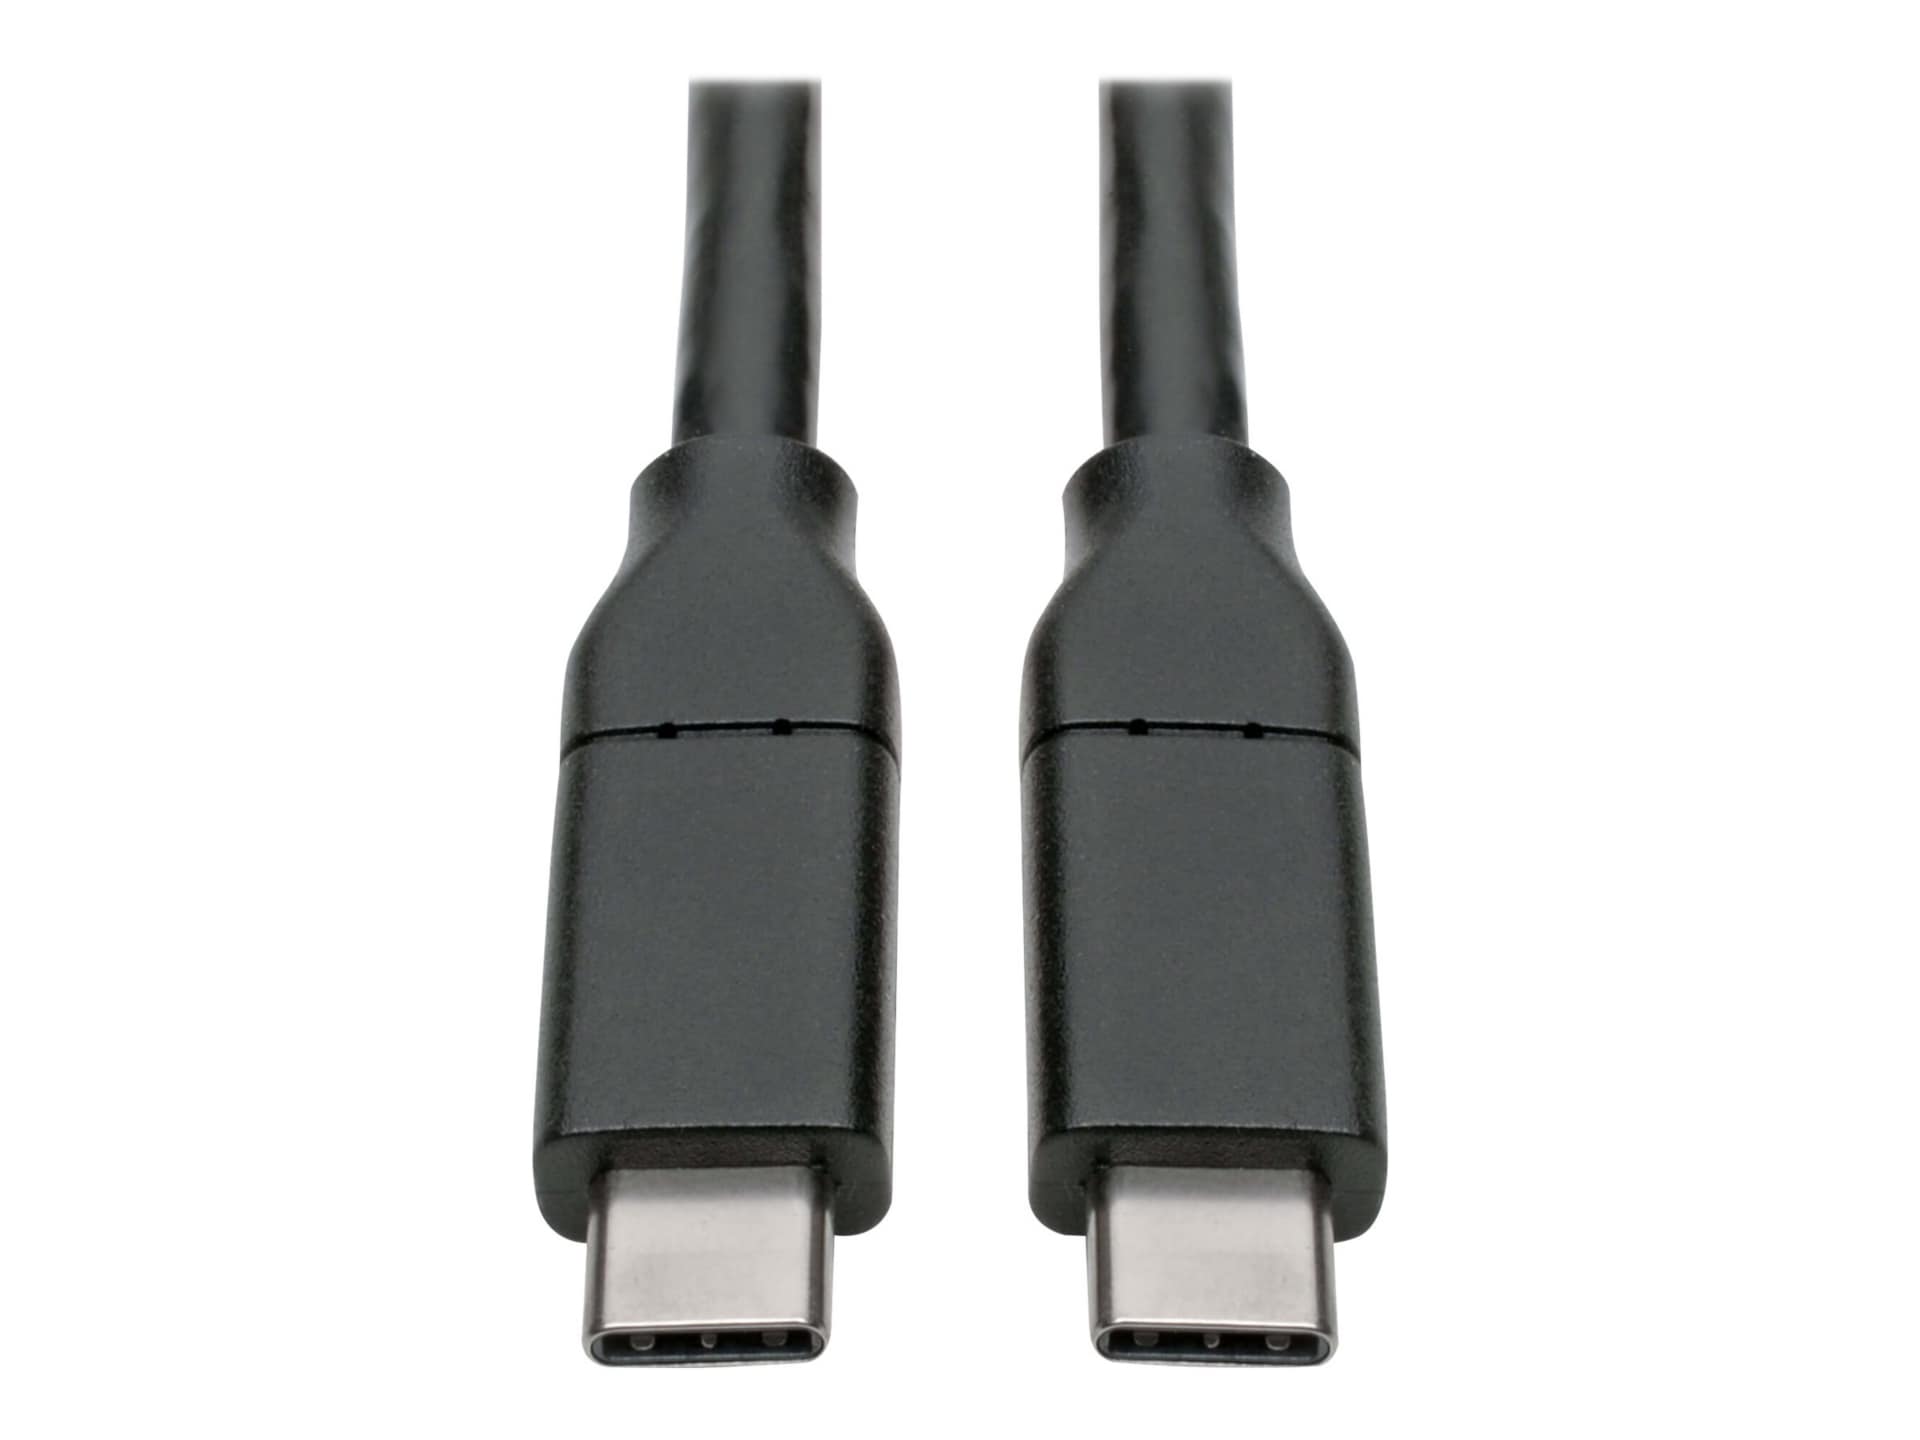 Tripp Lite USB Type C to USB C Cable USB 2.0 5A Rating USB-IF Cert M/M 13ft